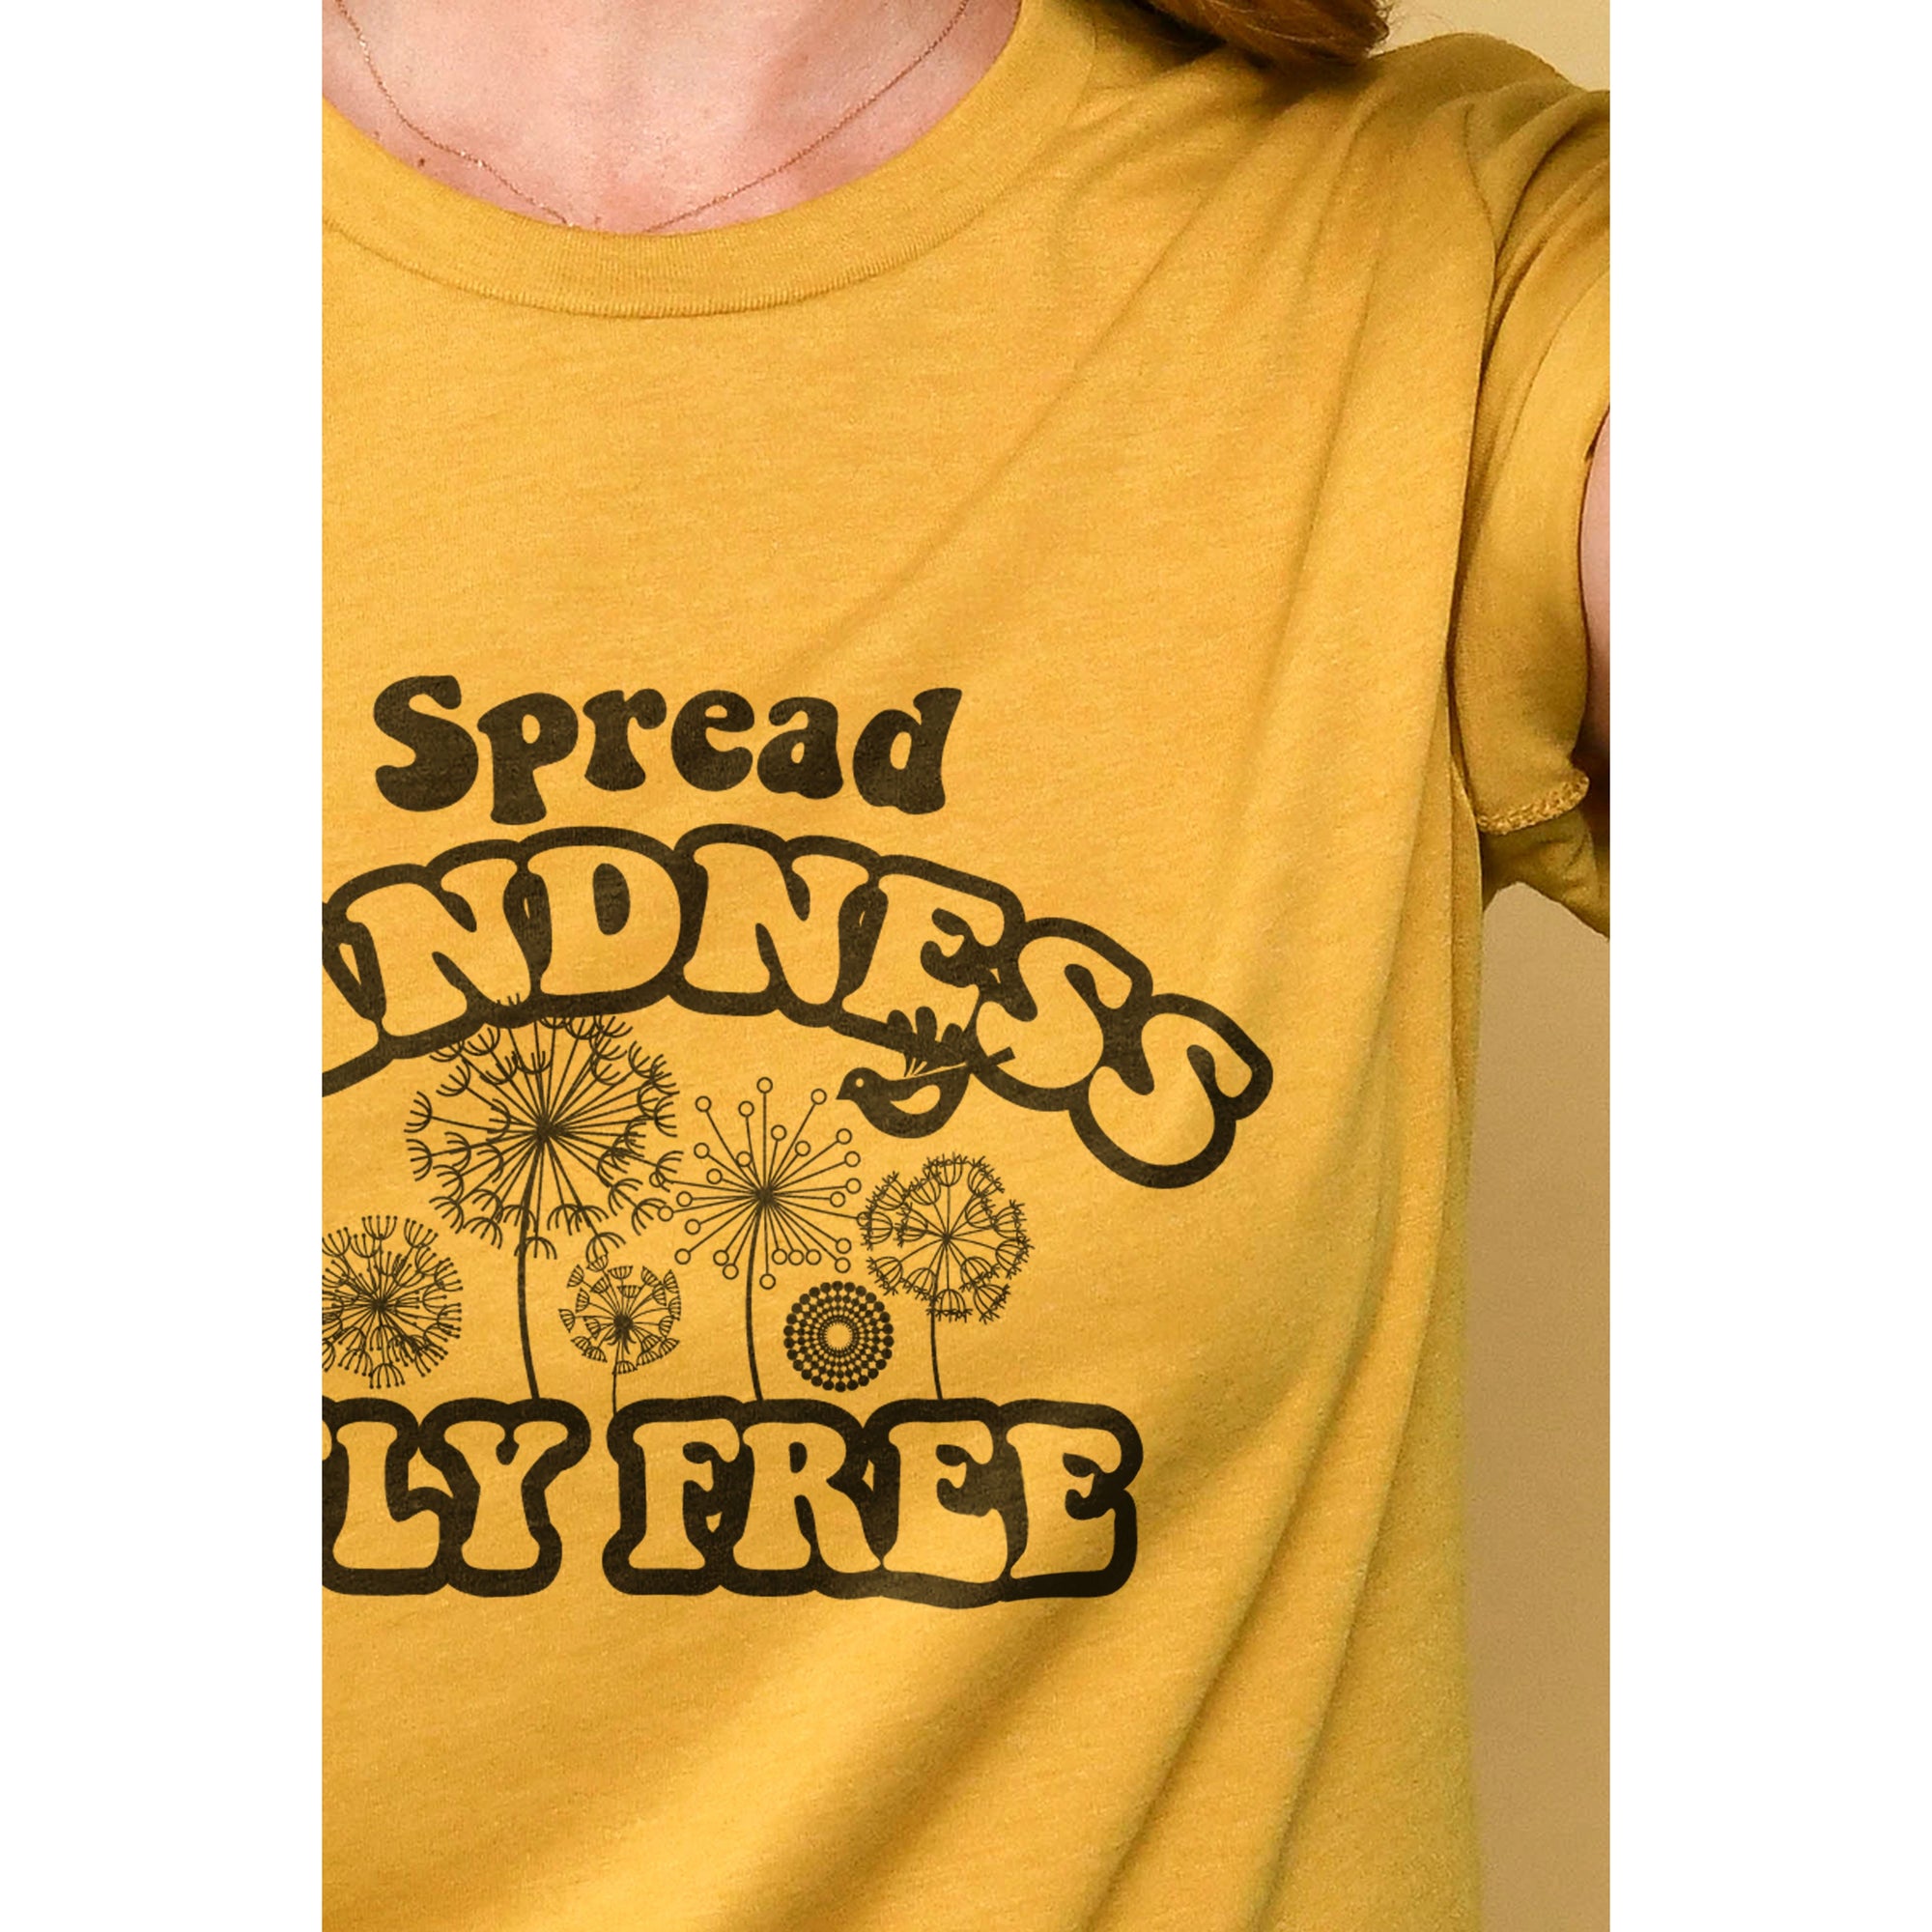 Spread Kindness Fly Free